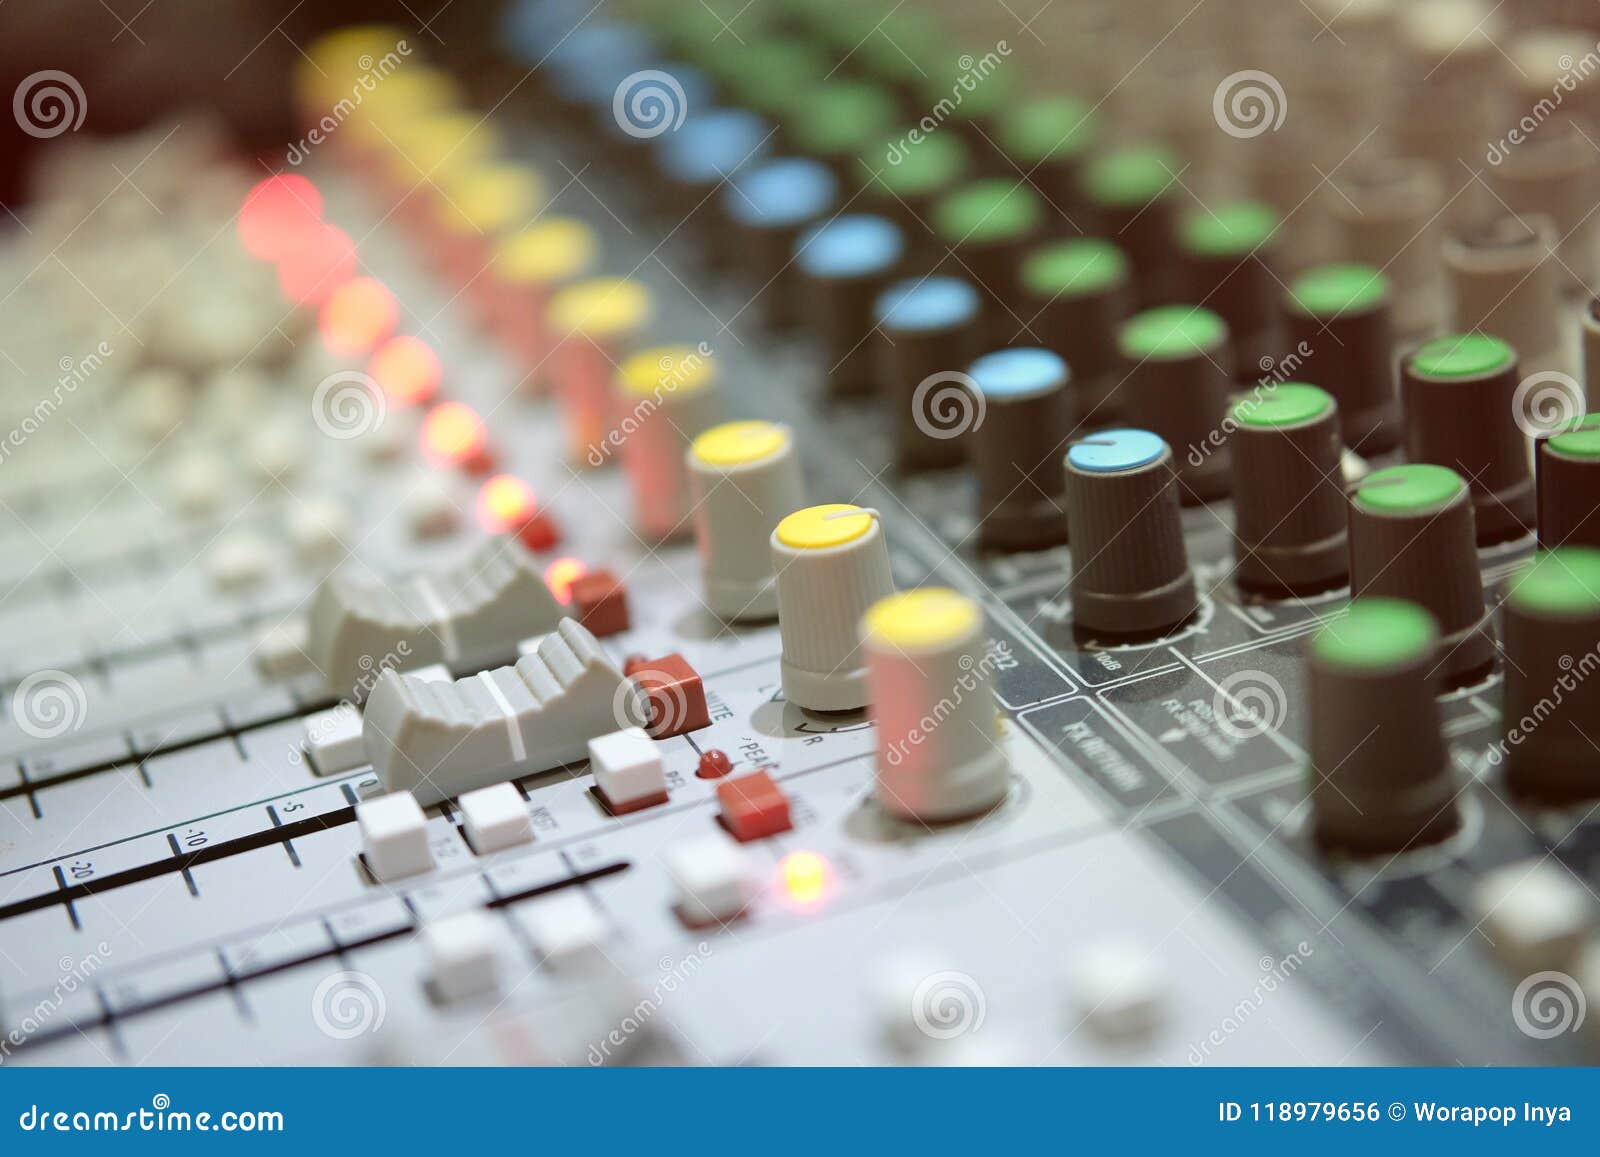 radio analog mixer in broadcast room with blur backgound